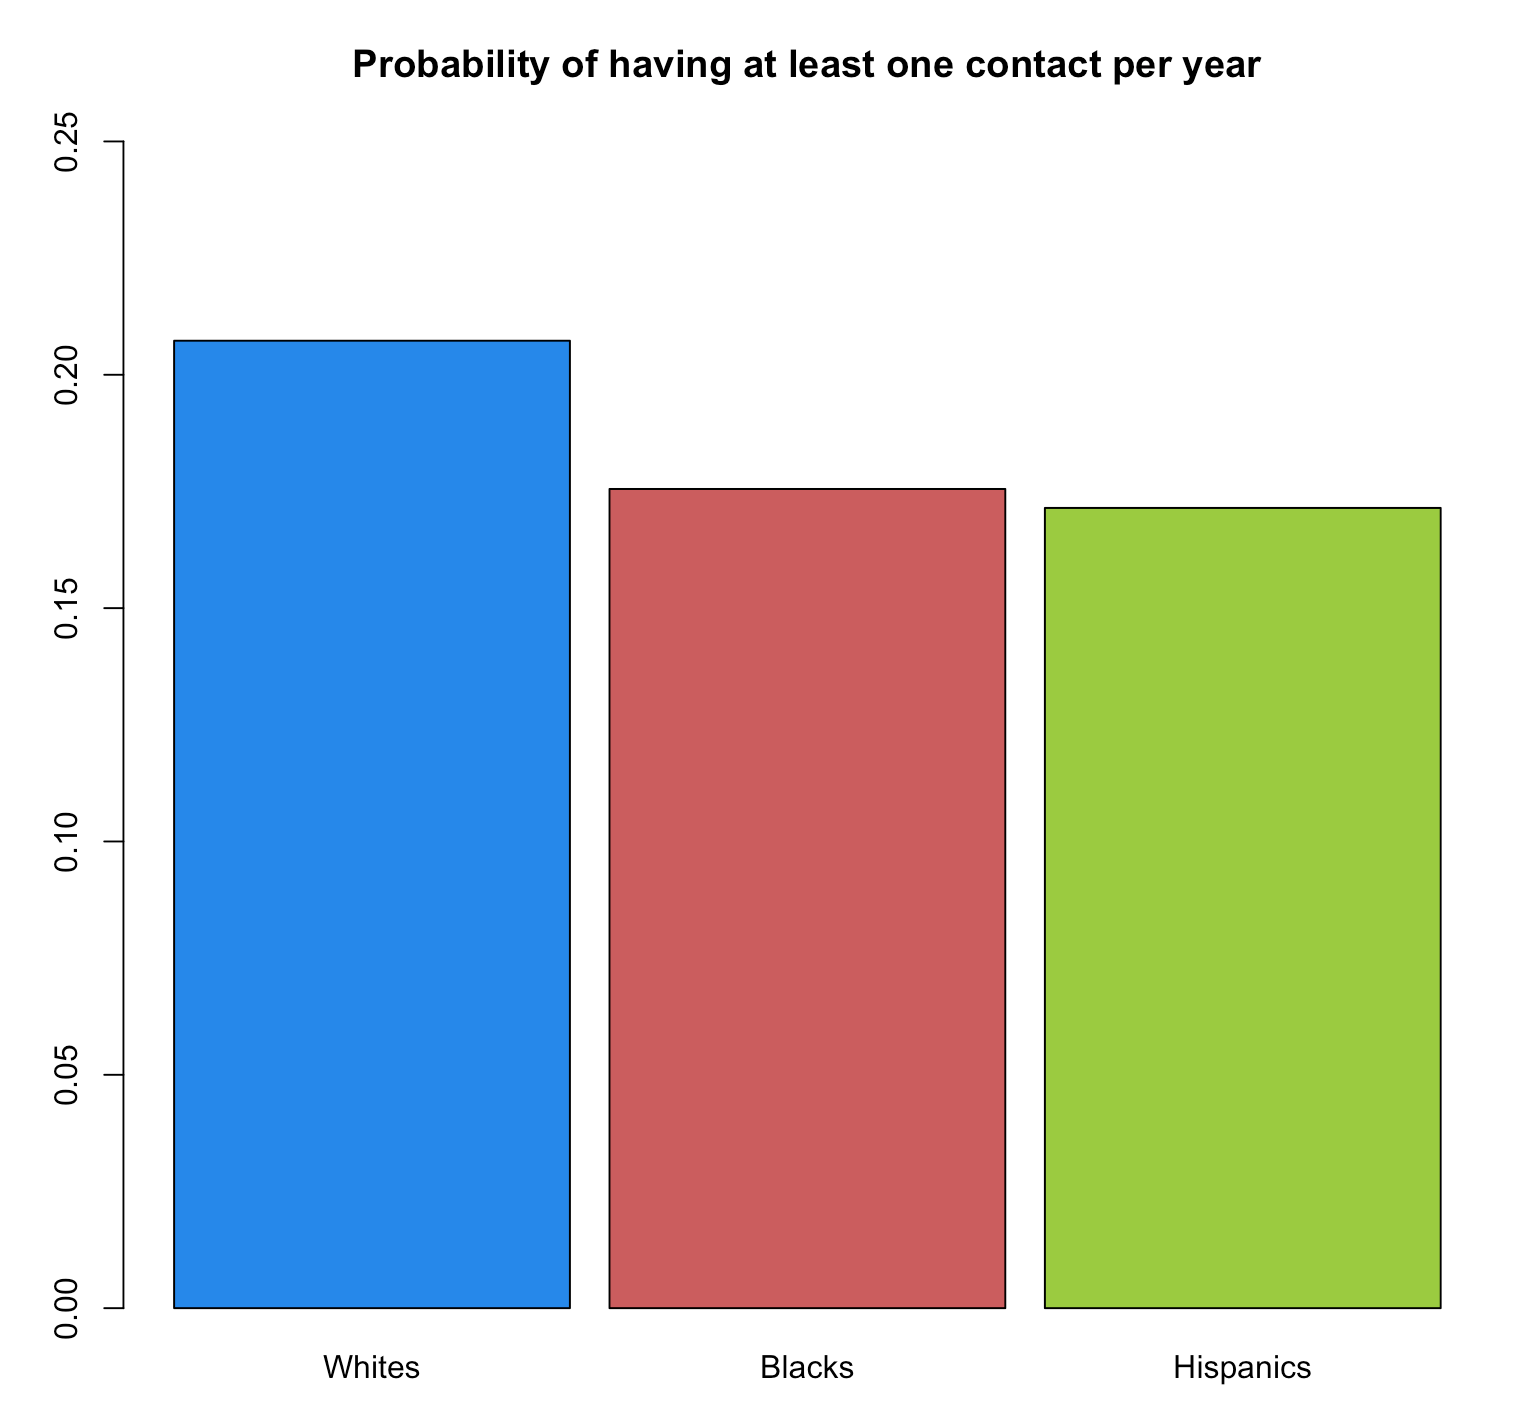 Probability-of-having-at-least-one-contact-per-year.png